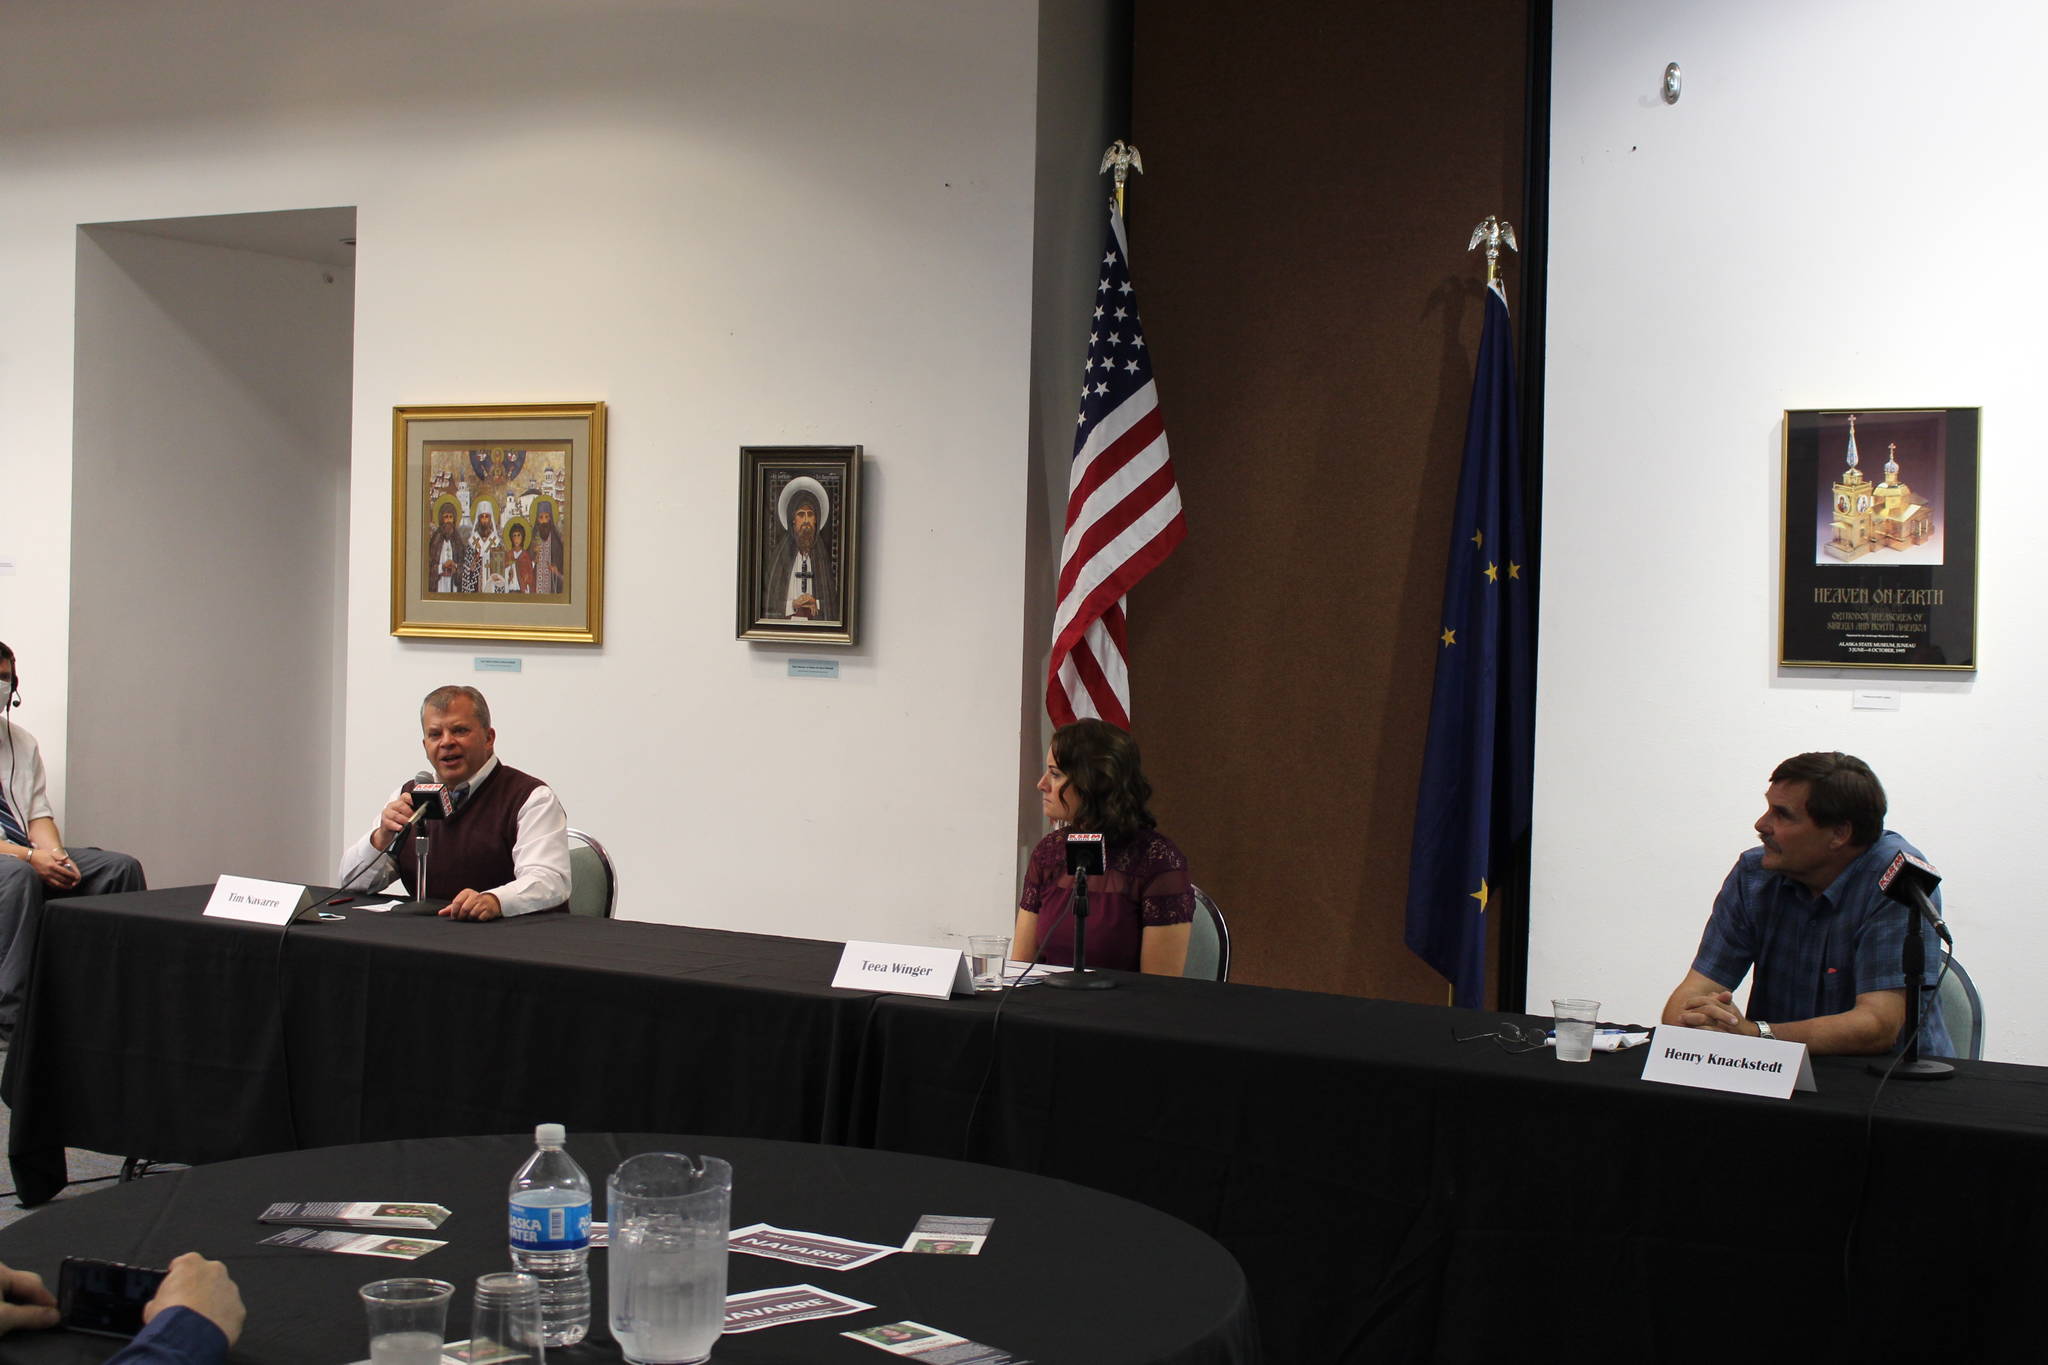 From left, Kenai City Council candidates Tim Navarre, Teea Winger and Henry Knackstedt participate in a candidate forum with the Kenai Chamber of Commerce at the Kenai Visitor and Cultural Center in Kenai, Alaska, on Sept. 16, 2020. (Photo by Brian Mazurek/Peninsula Clarion)